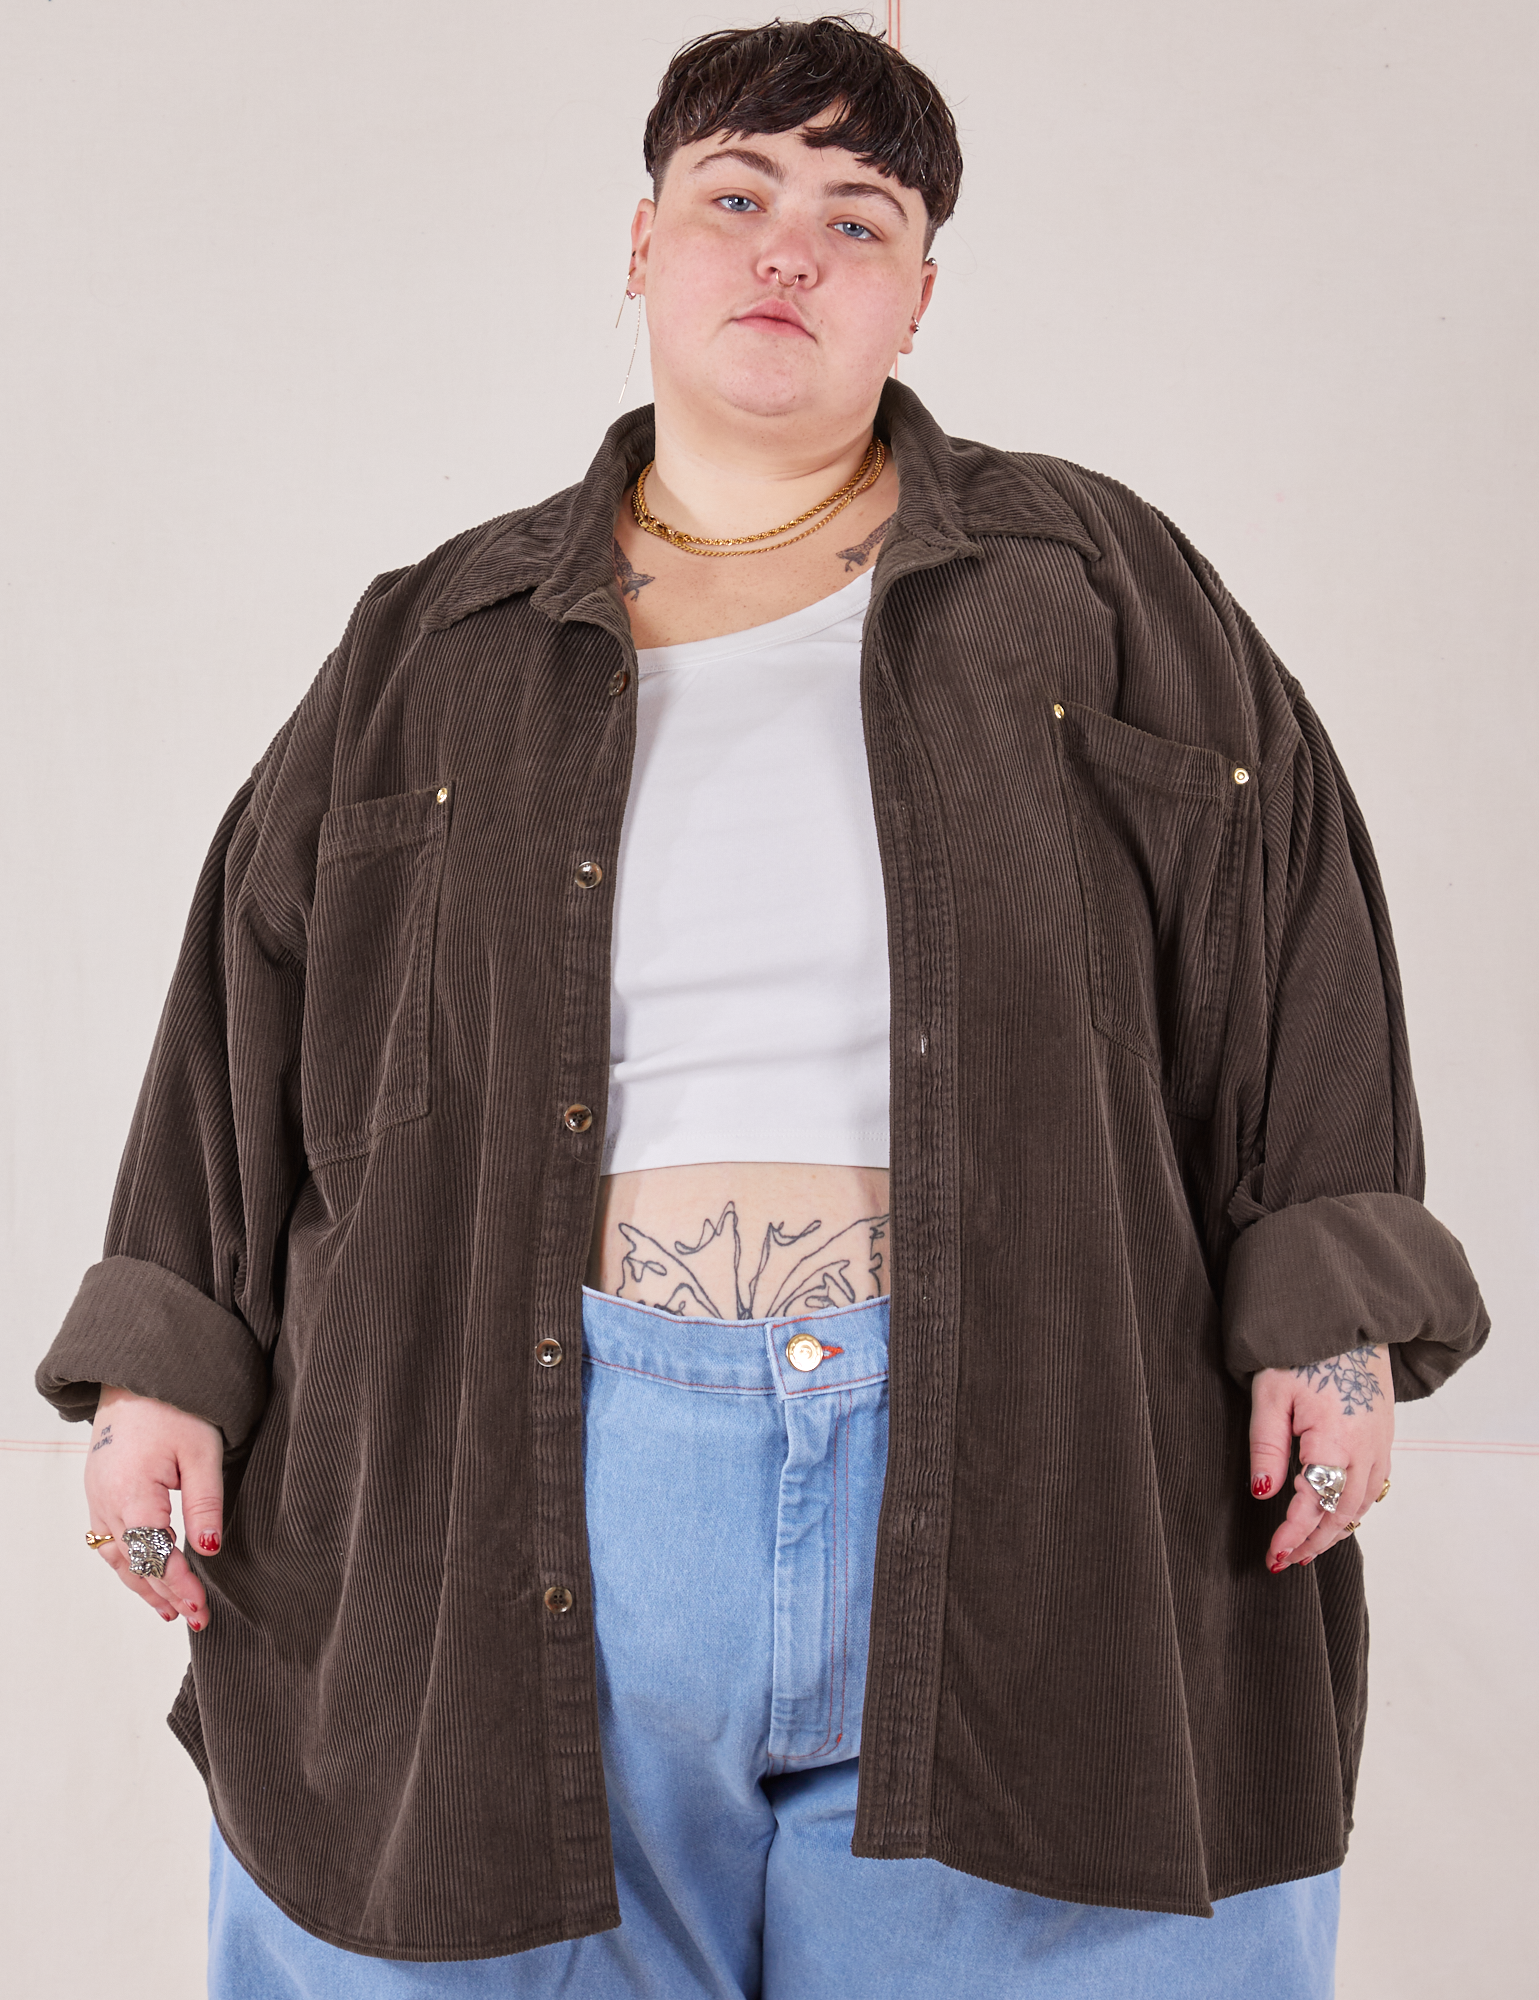 Jordan is 5&#39;4&quot; and wearing 4XL Corduroy Overshirt in Espresso Brown with a vintage off-white Cropped Tank Top underneath paired with light wash Denim Trouser Jeans